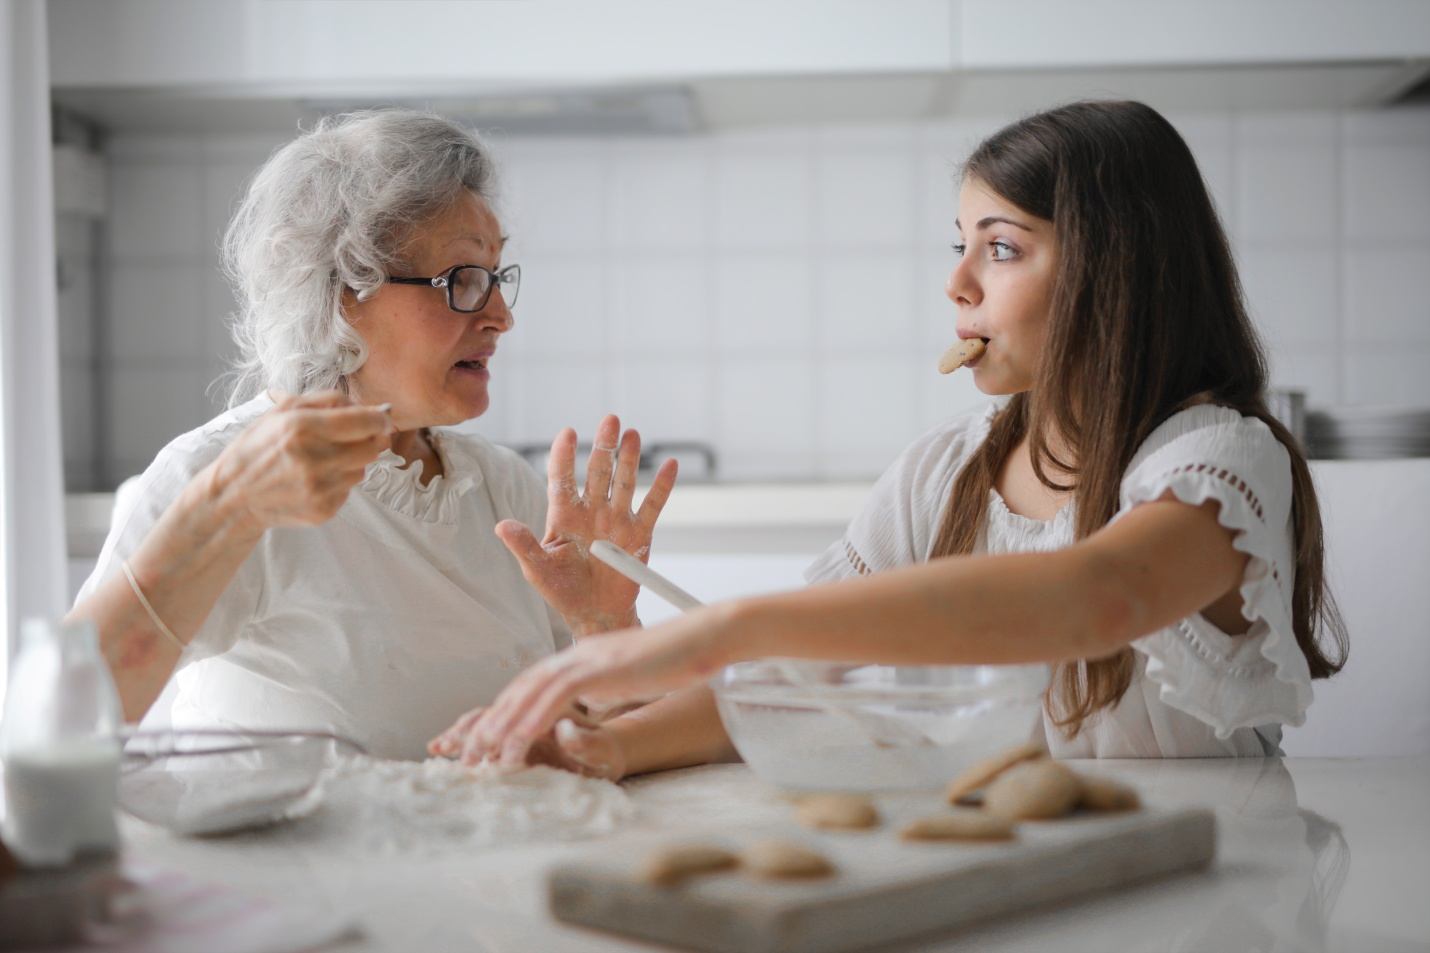 A woman baking cookies with her grandmother